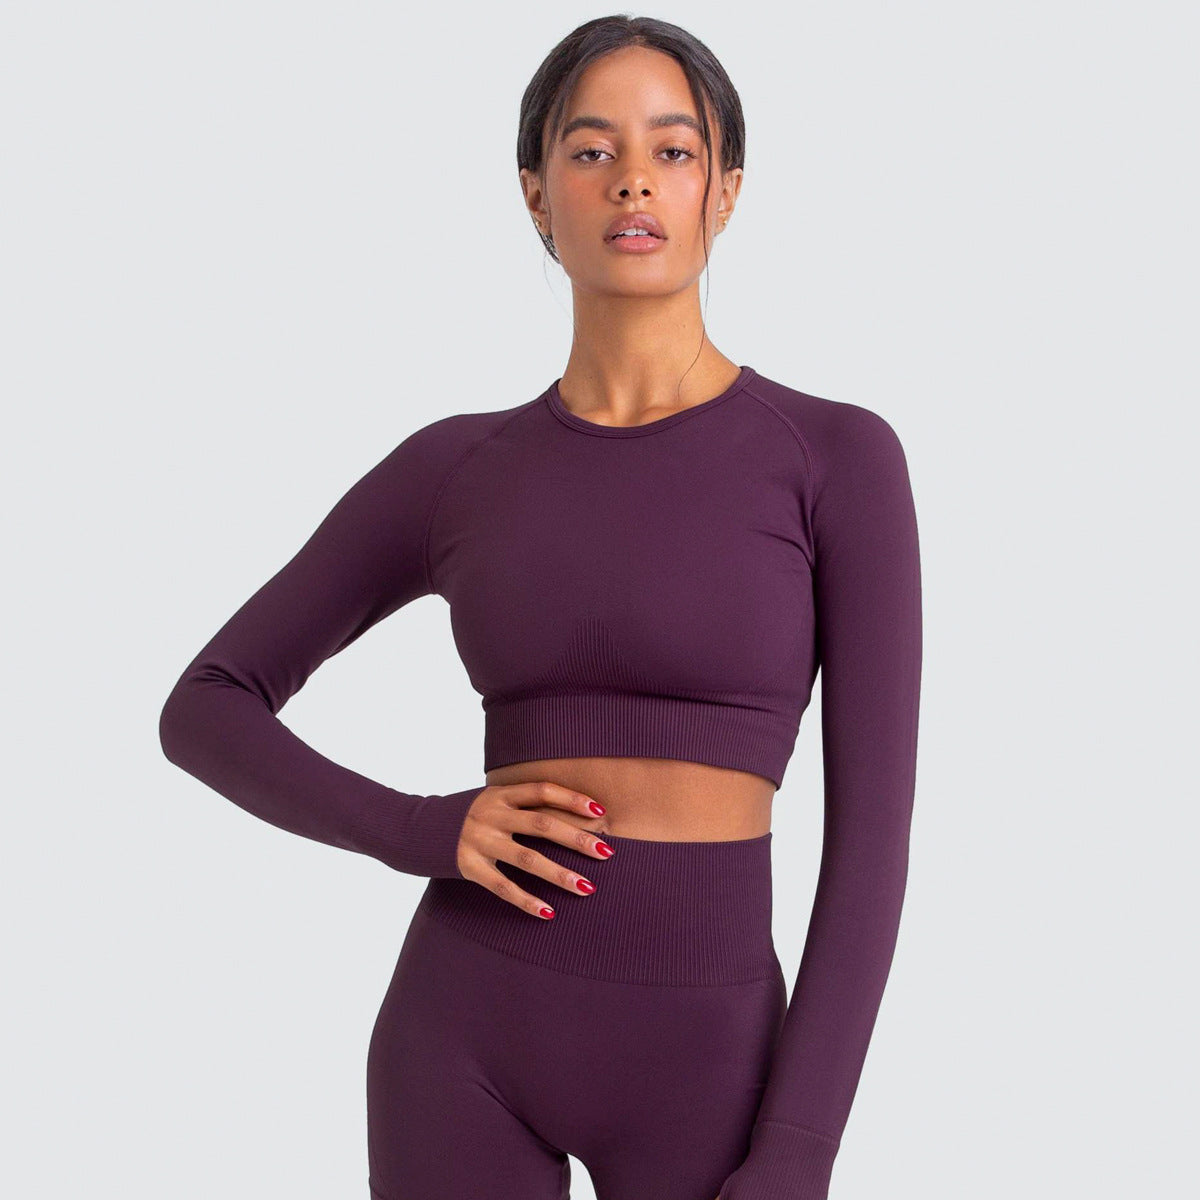 Seamless Slim-Fit Workout Top (only) - Activewear - Sports Tops - malbusaat.co.uk